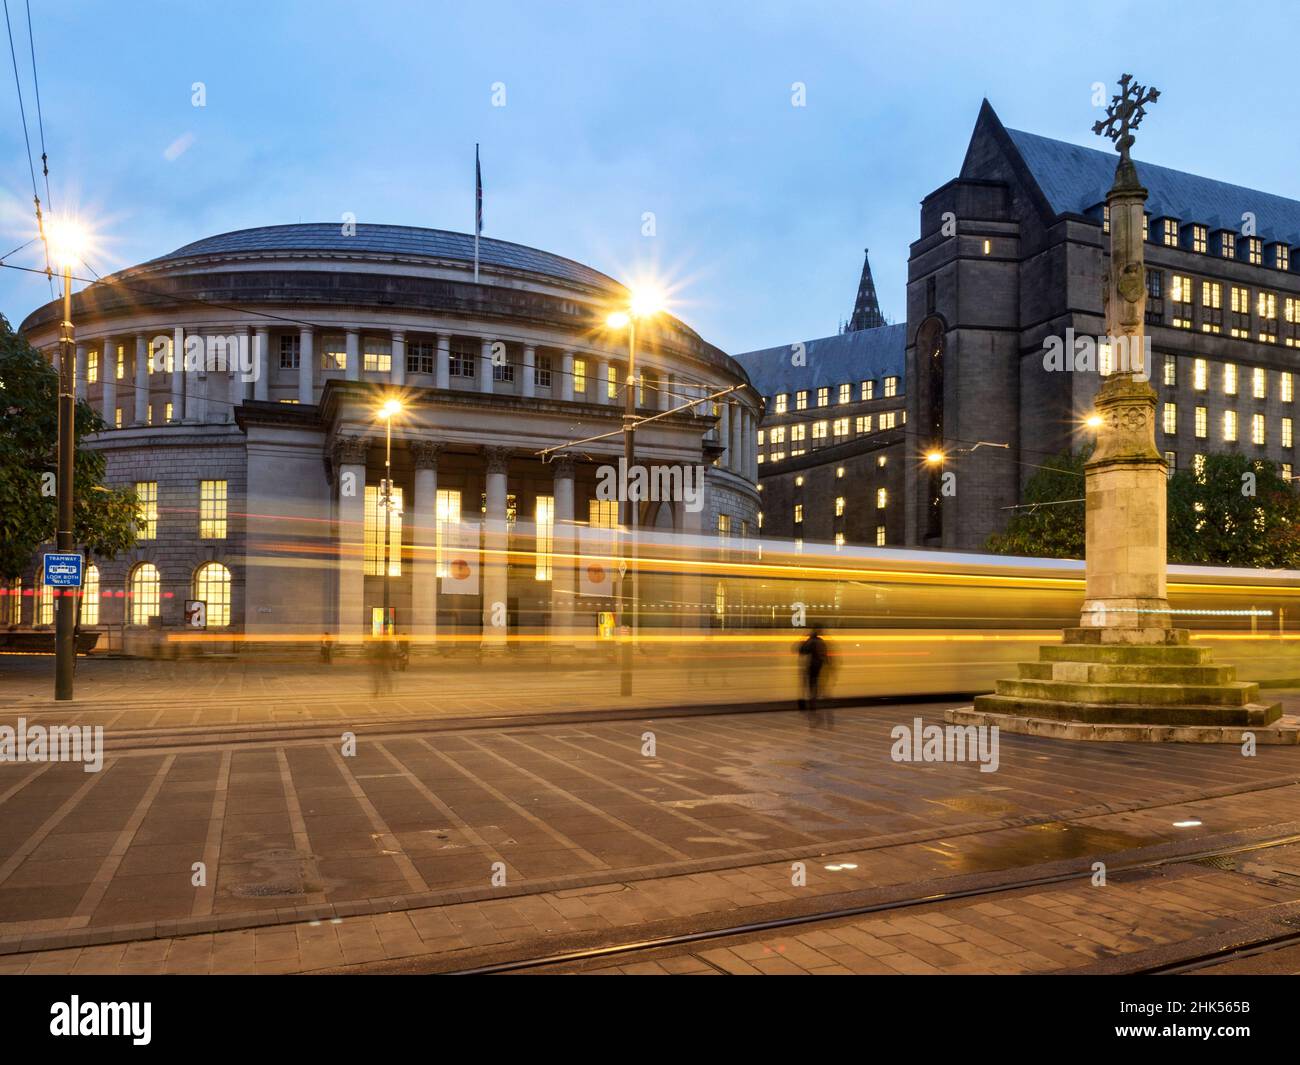 St. Peters Square, Manchester, Angleterre, Royaume-Uni, Europe Banque D'Images